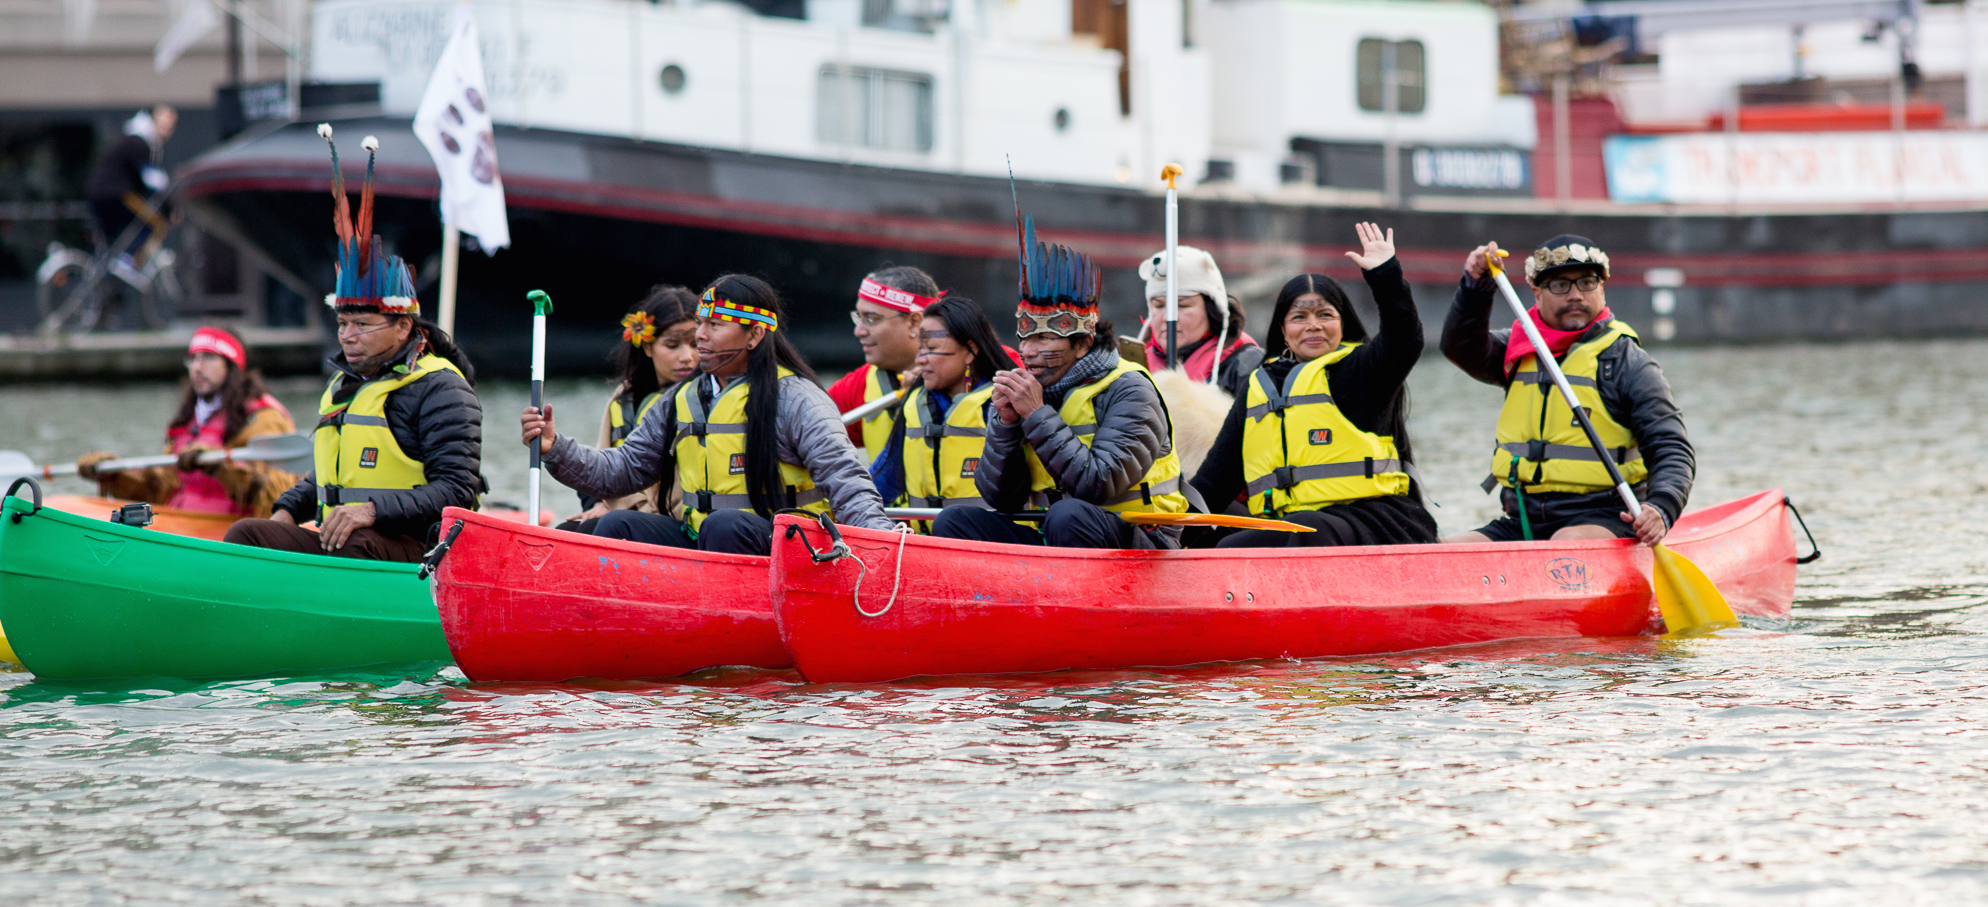 PARIS, FRANCE-- Indigenous Peoples from the Arctic to the Amazon gathered to demand "true climate solutions including bottom up initiatives originating in Indigenous knowledge, culture, and spirituality." The Indigenous flotilla canoed and kayaked on the Bassin de la Villette during COP21 in Paris. On December 6, 2015, the COP21 entered its 7th day of negotiations at the United Nations Climate Change conference. The COP21 is being held in Paris, France, at the Le Bourget conference center. Photos by: Emma Cassidy | Survival Media Agency